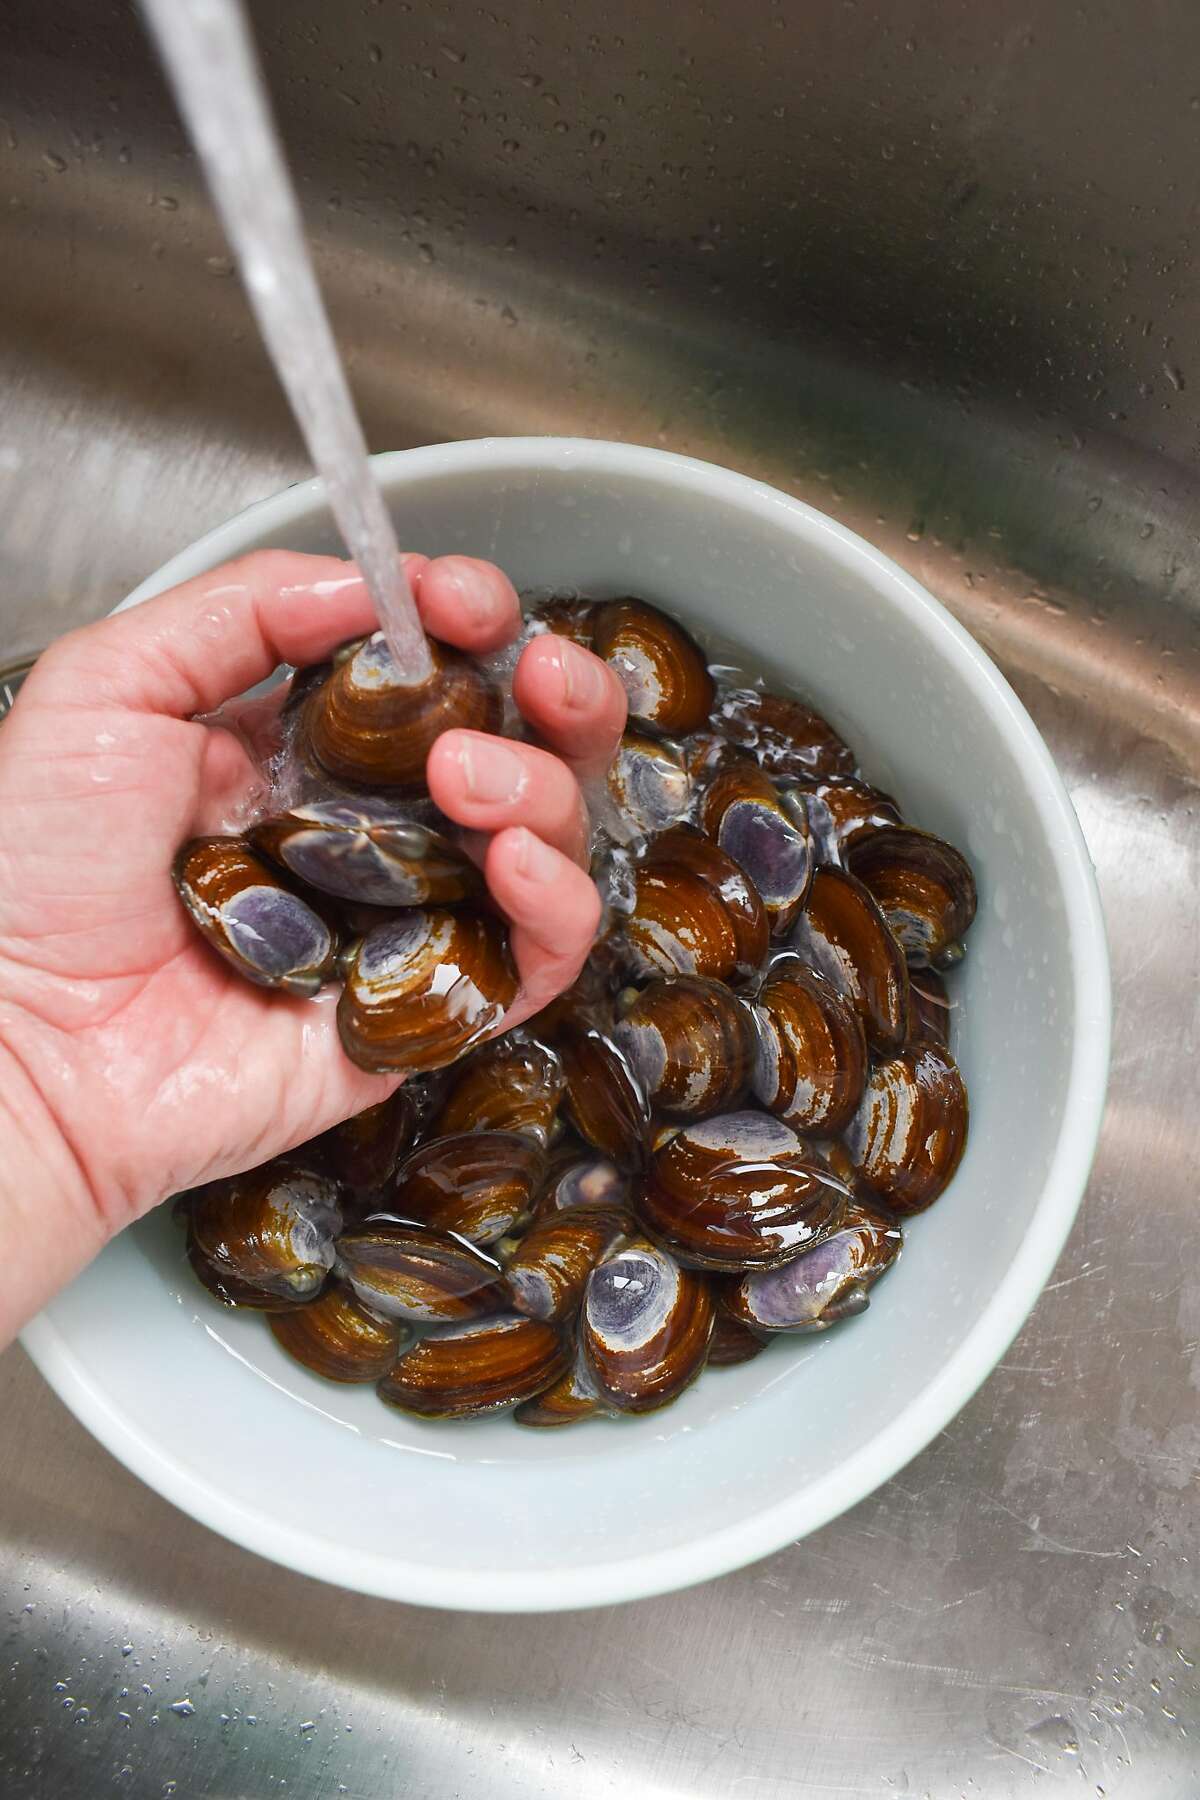 Wash the clams thoroughly.